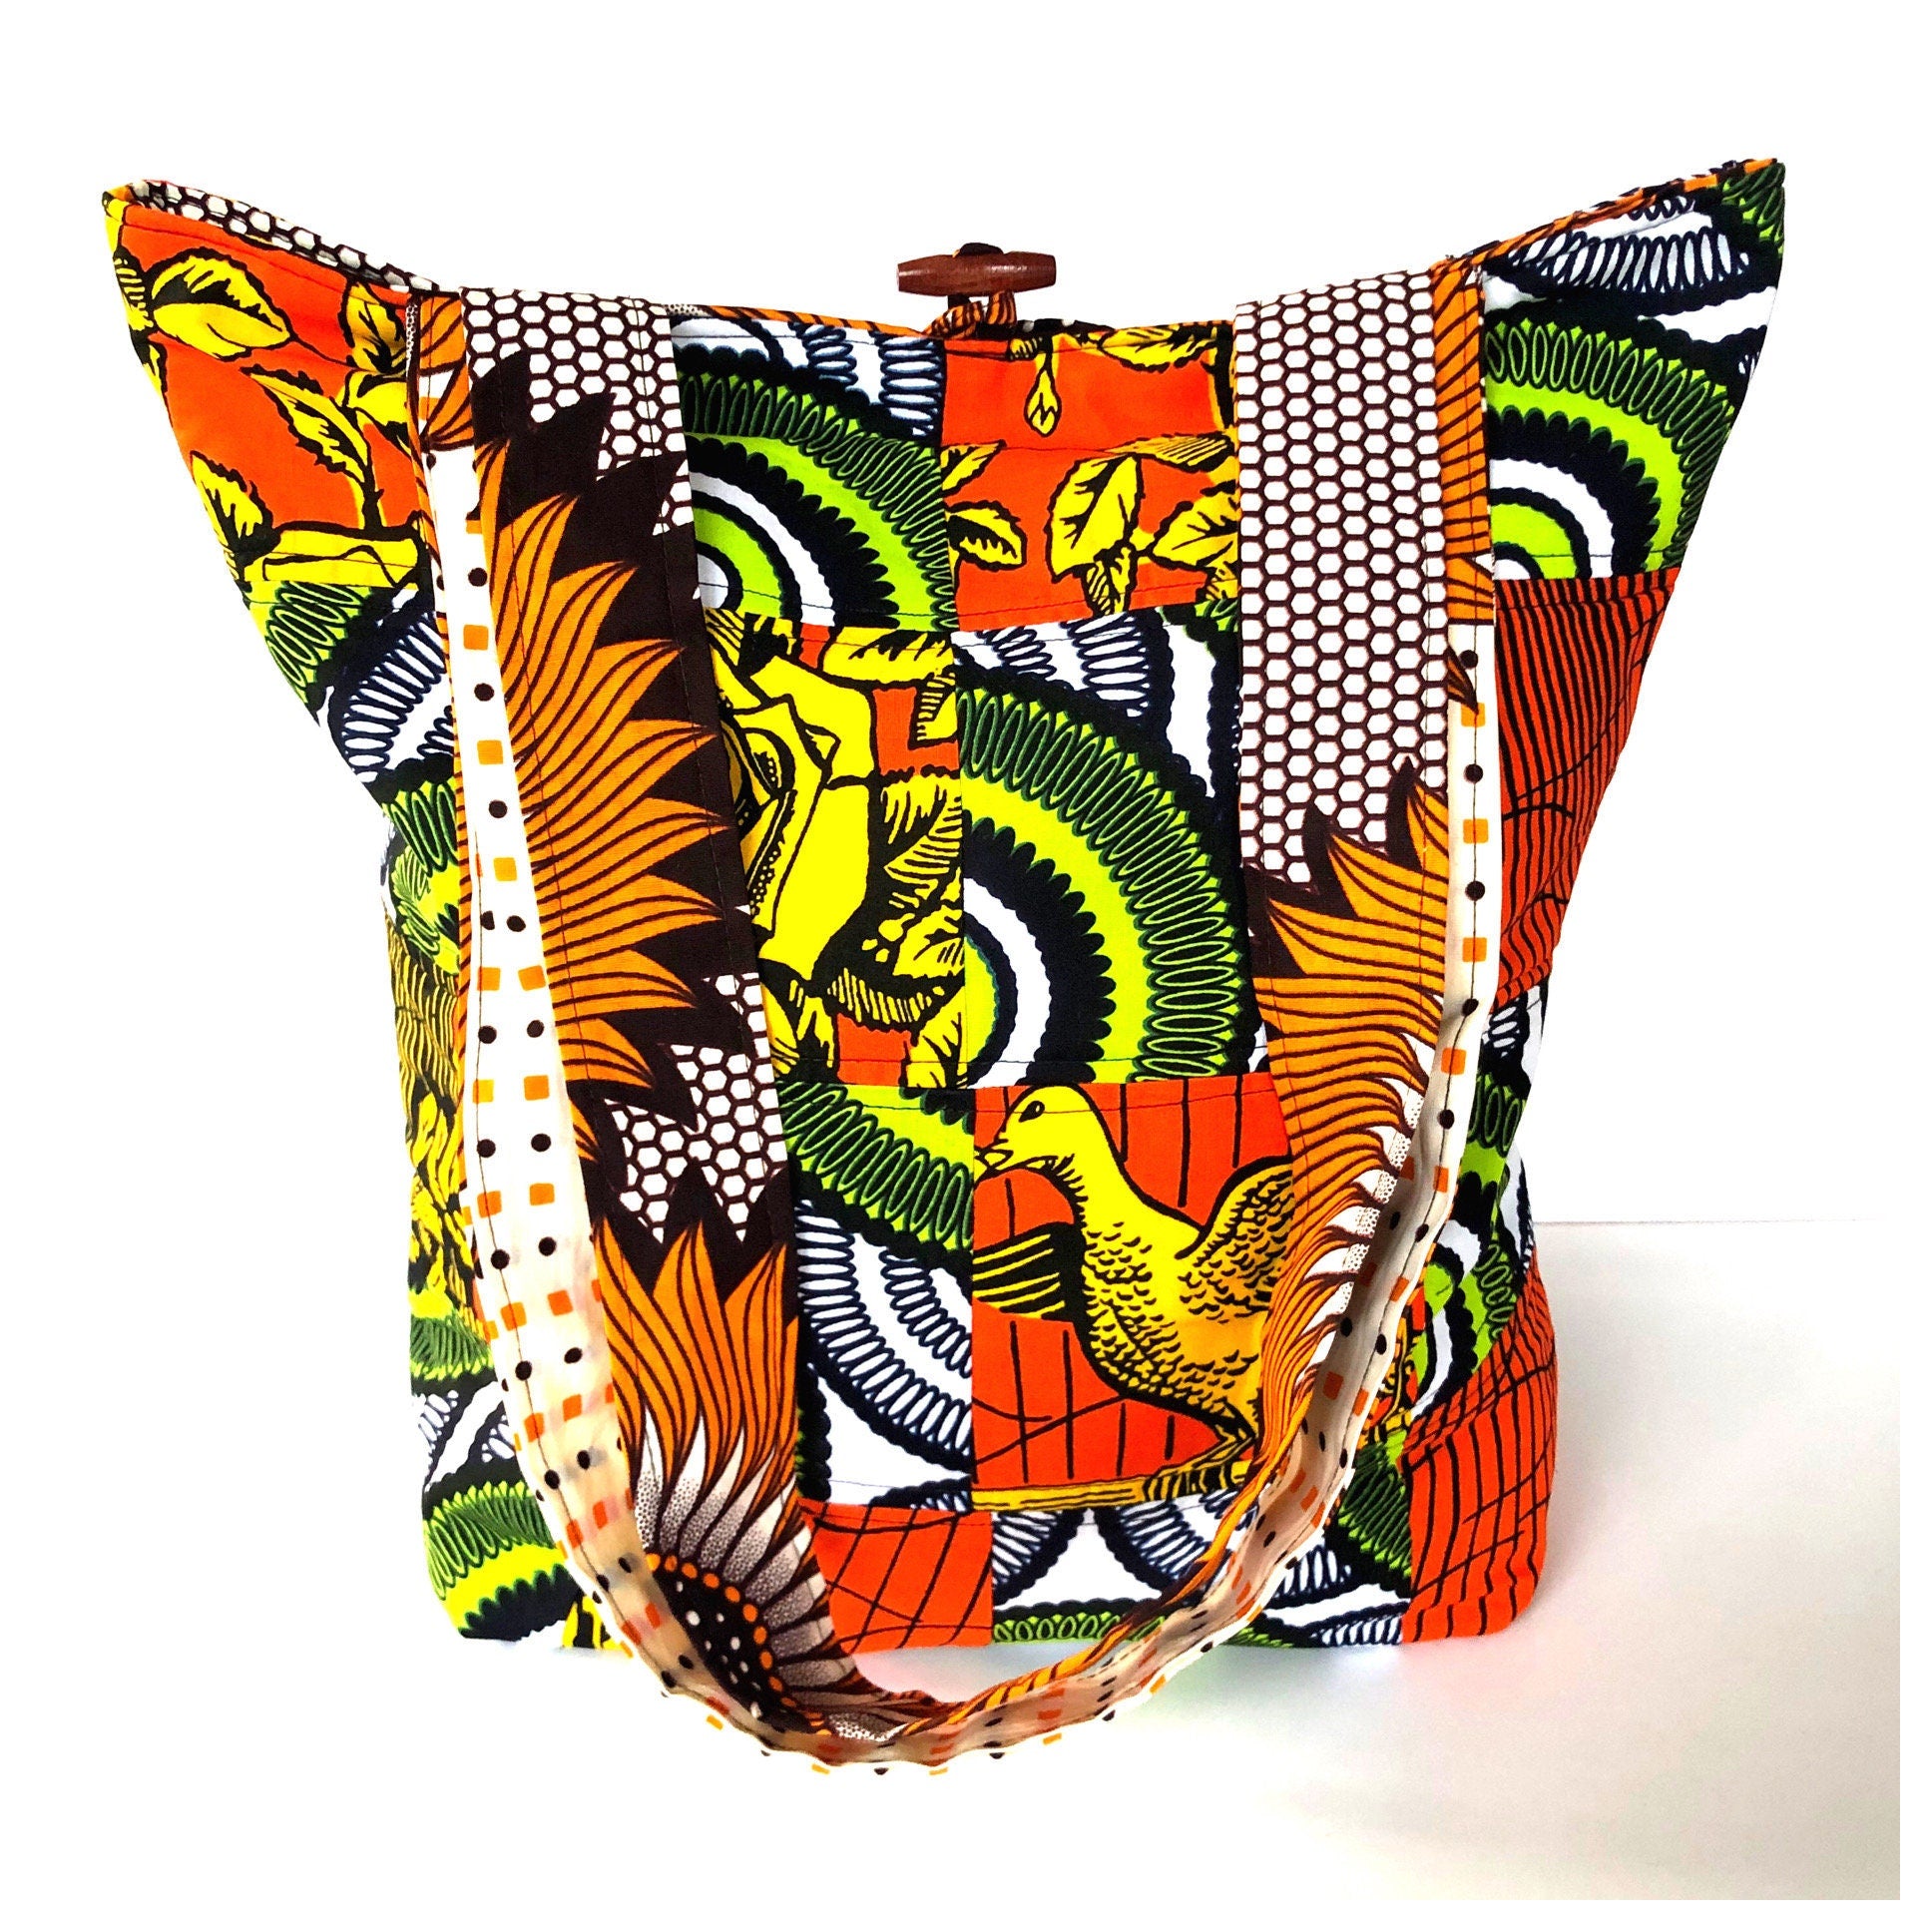 PIEH Big Patchwork African  fabric quilted tote bag- Orange